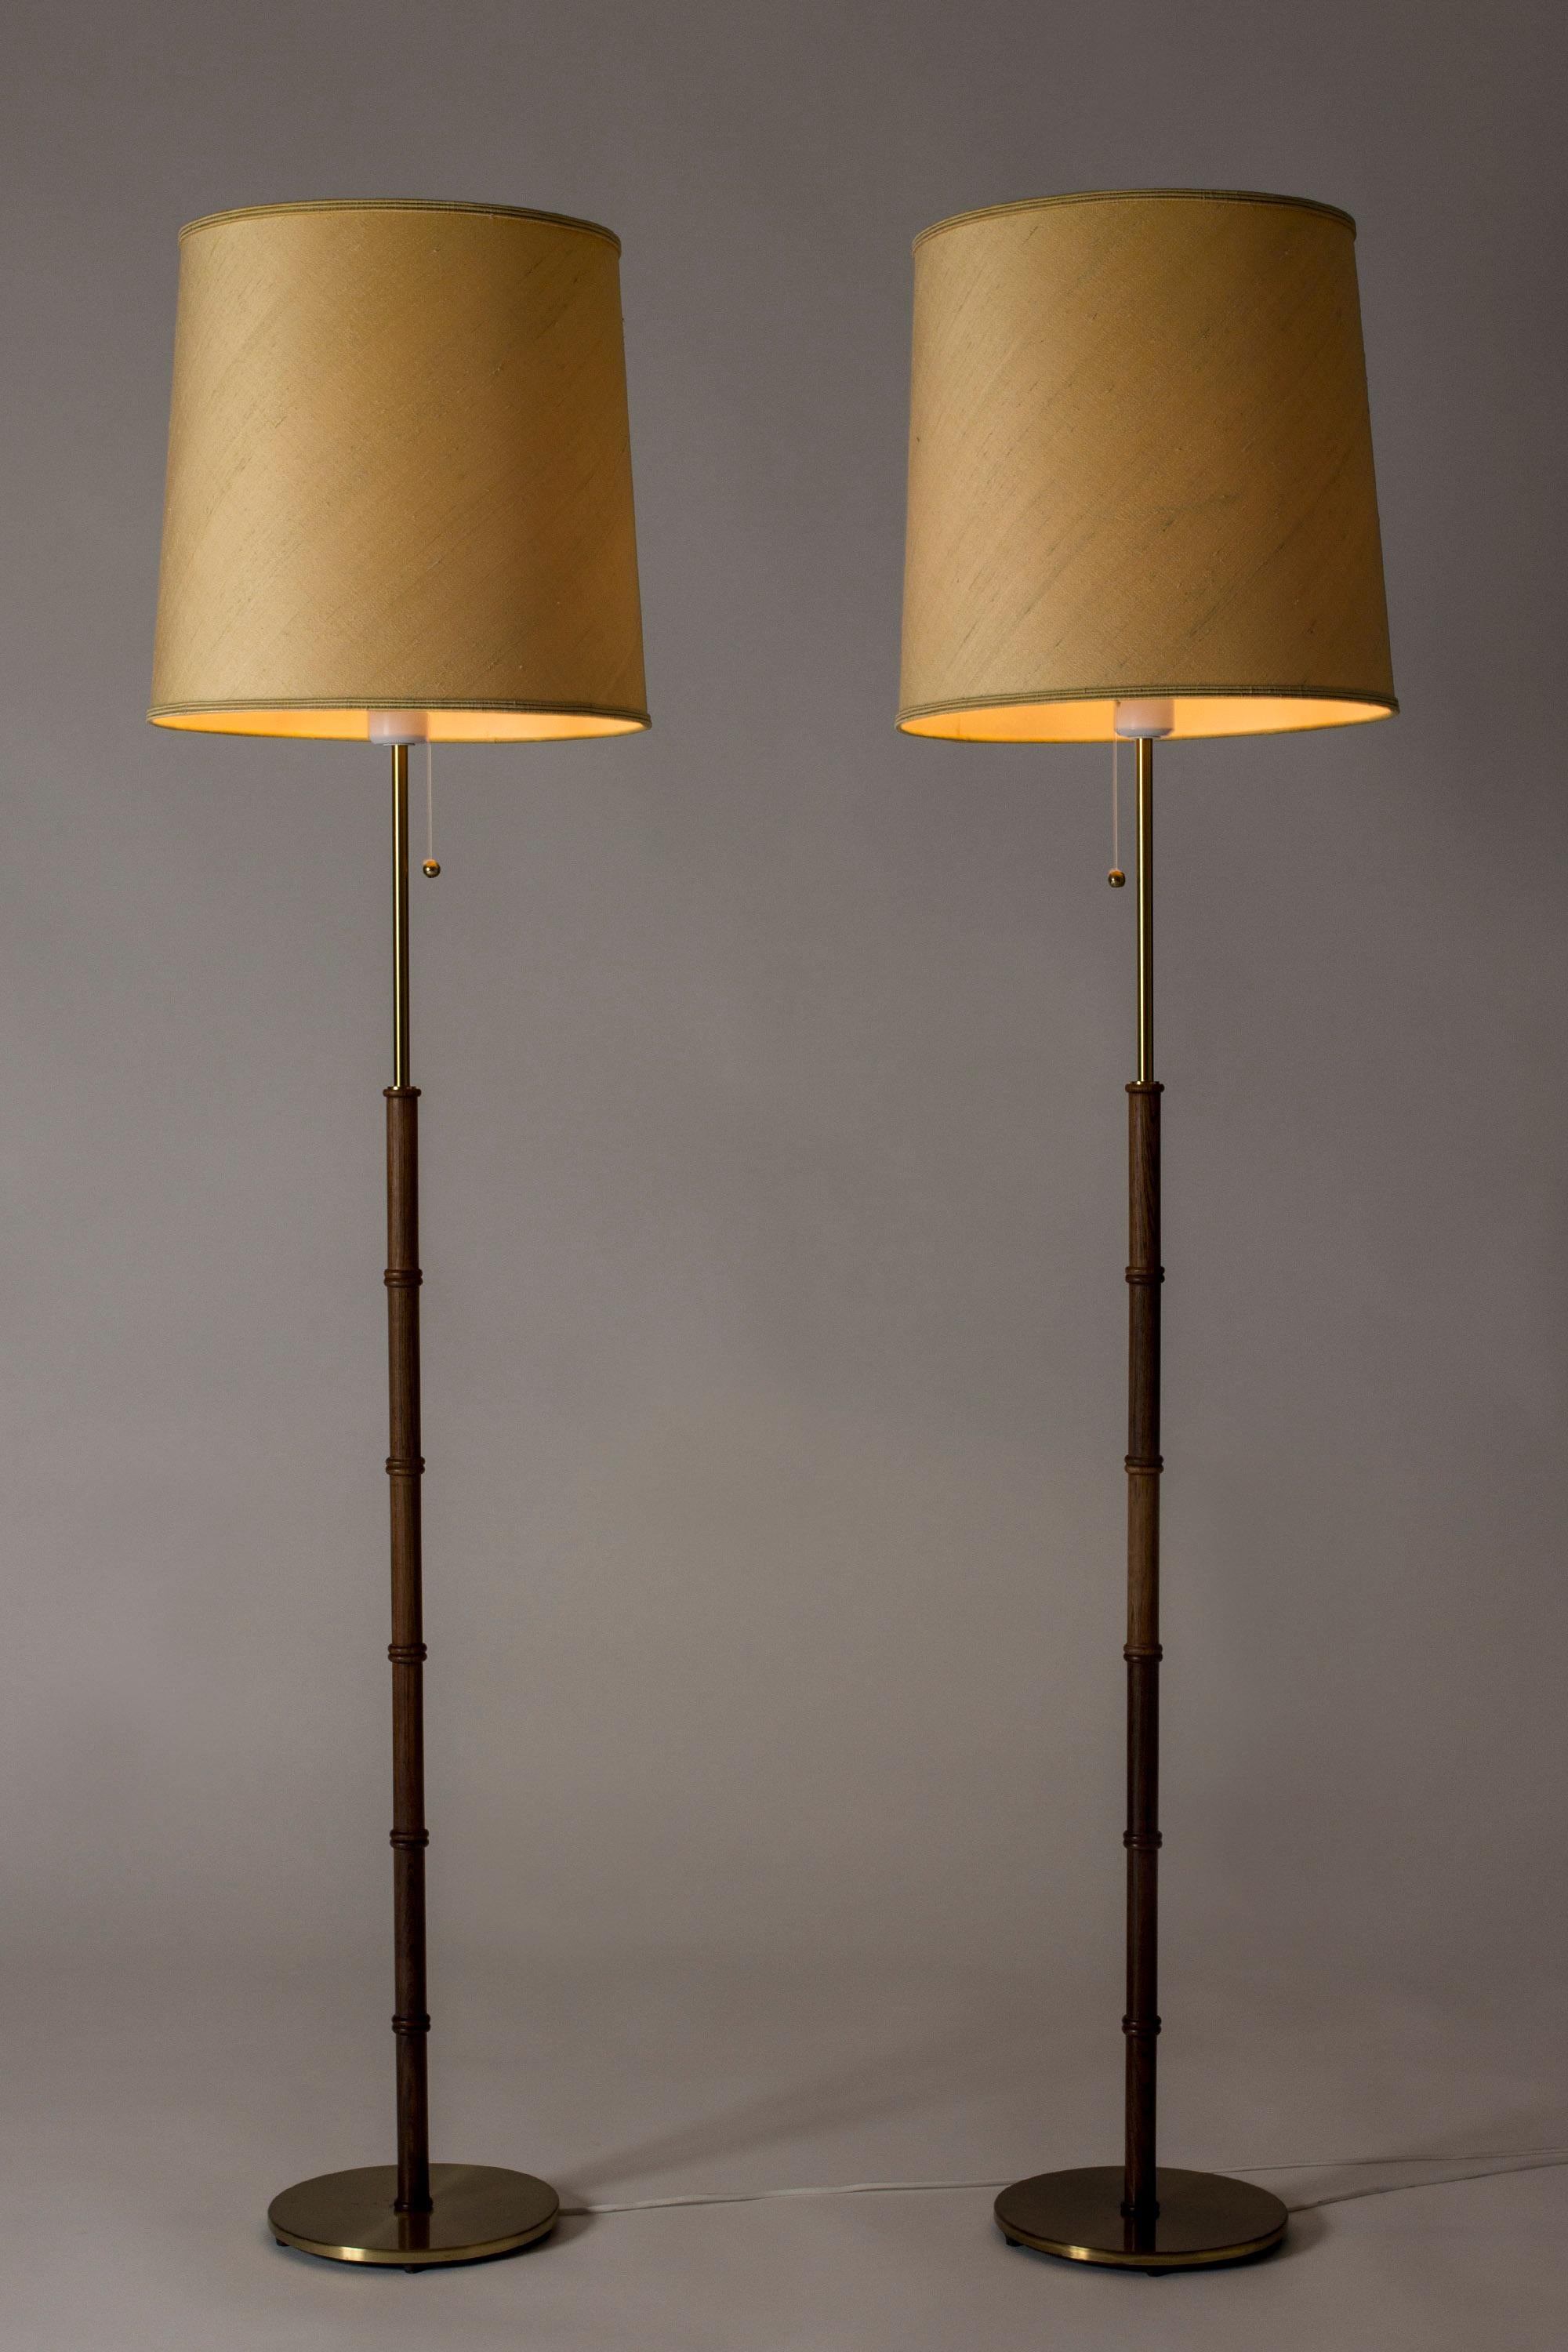 Pair of cool floor lamps from Falkenbergs Belysning, made from brass with rosewood stems. Wood nicely carved into a bamboo-stem form, great woodgrain. Original oversized shades.